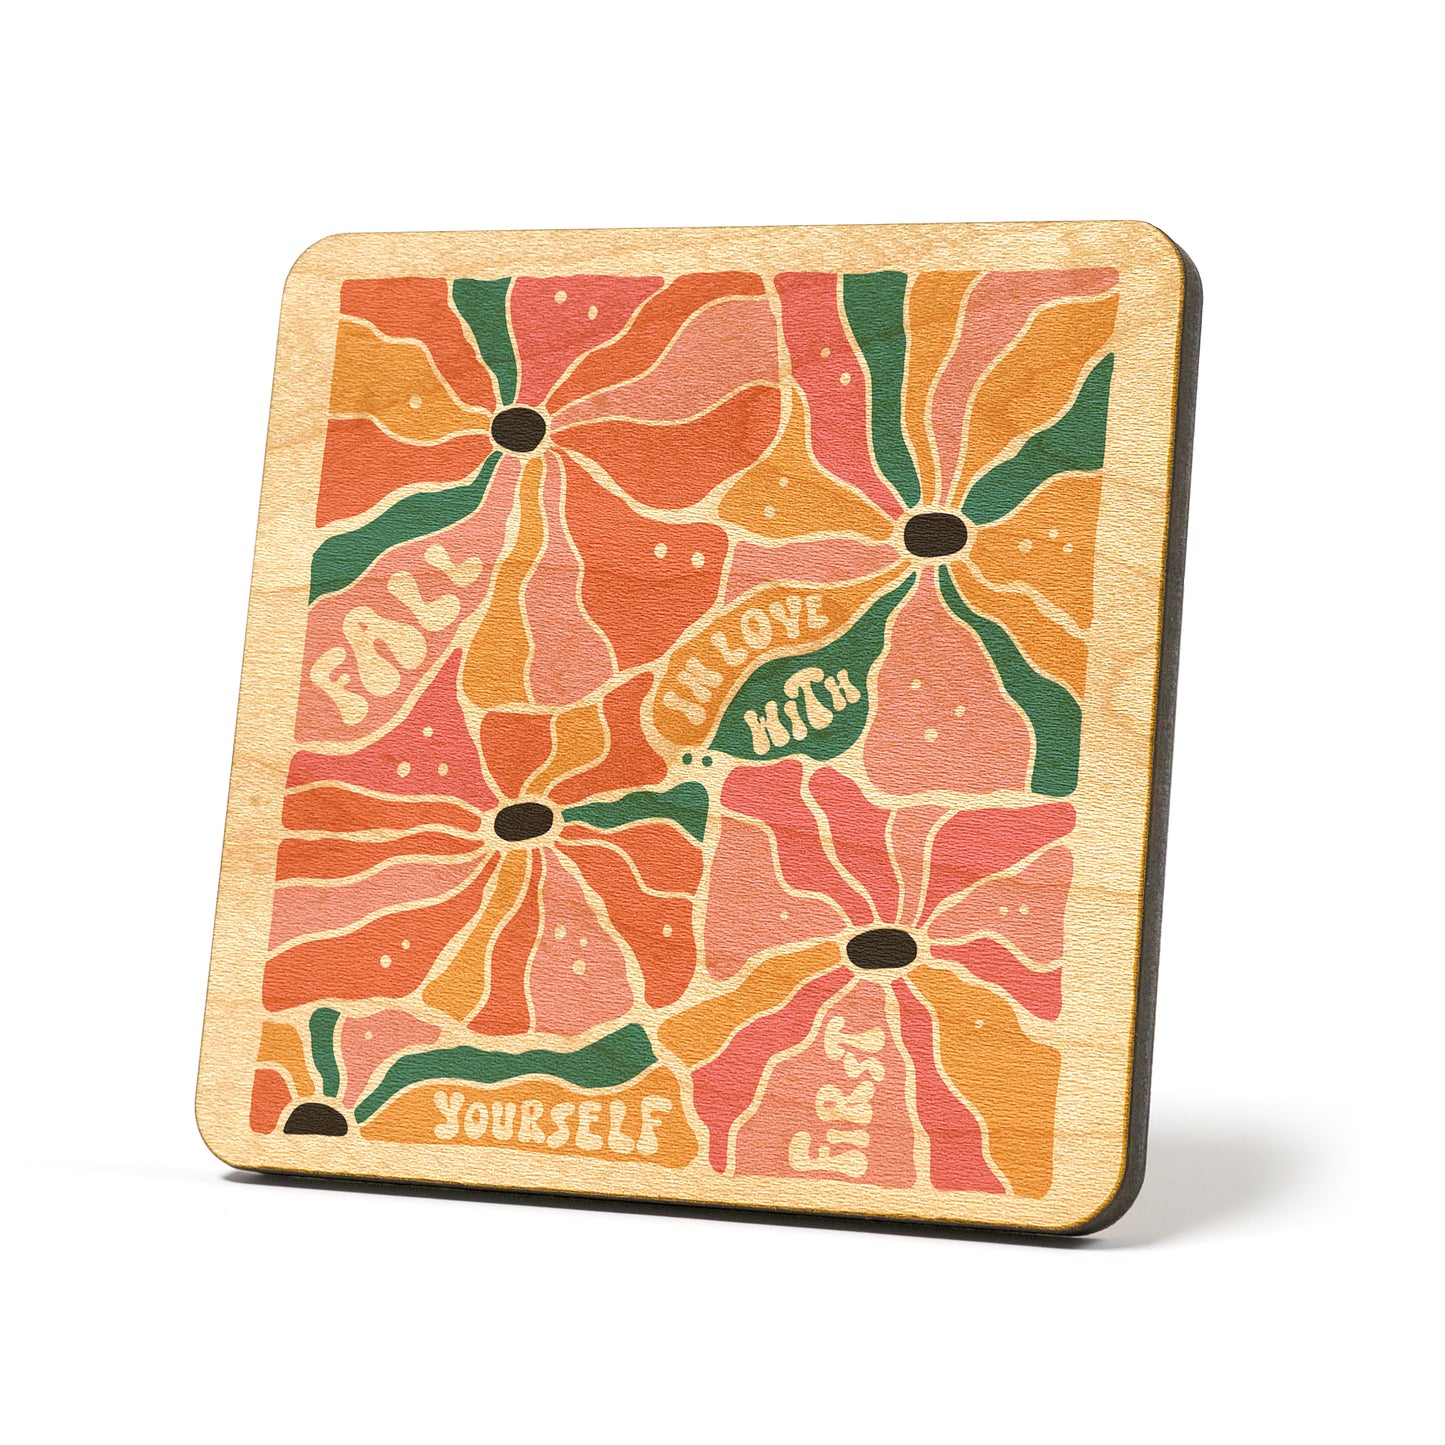 Fall in love with yourself first boho Graphic Coasters